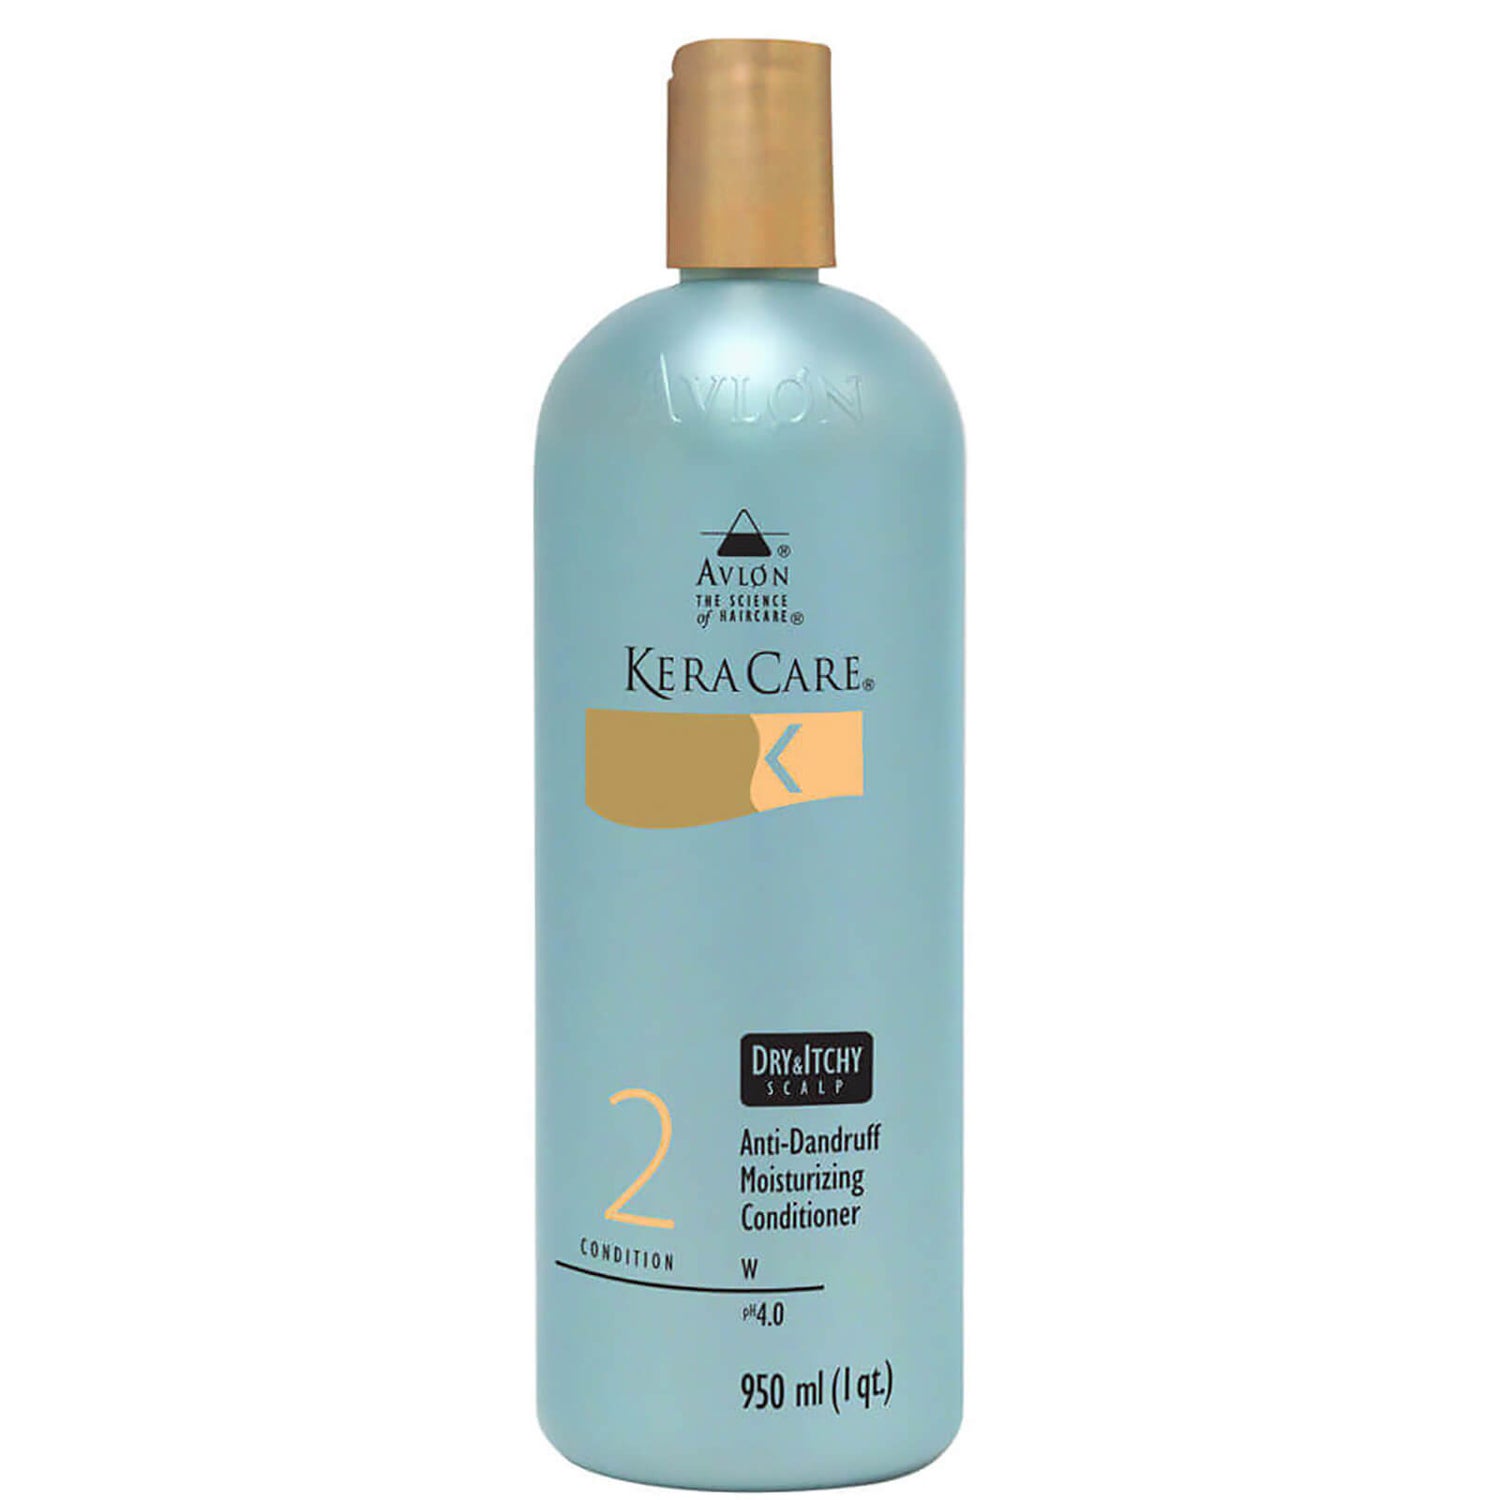 KeraCare Dry and Itchy Scalp Moisturizing Conditioner (950ml, Worth $59)